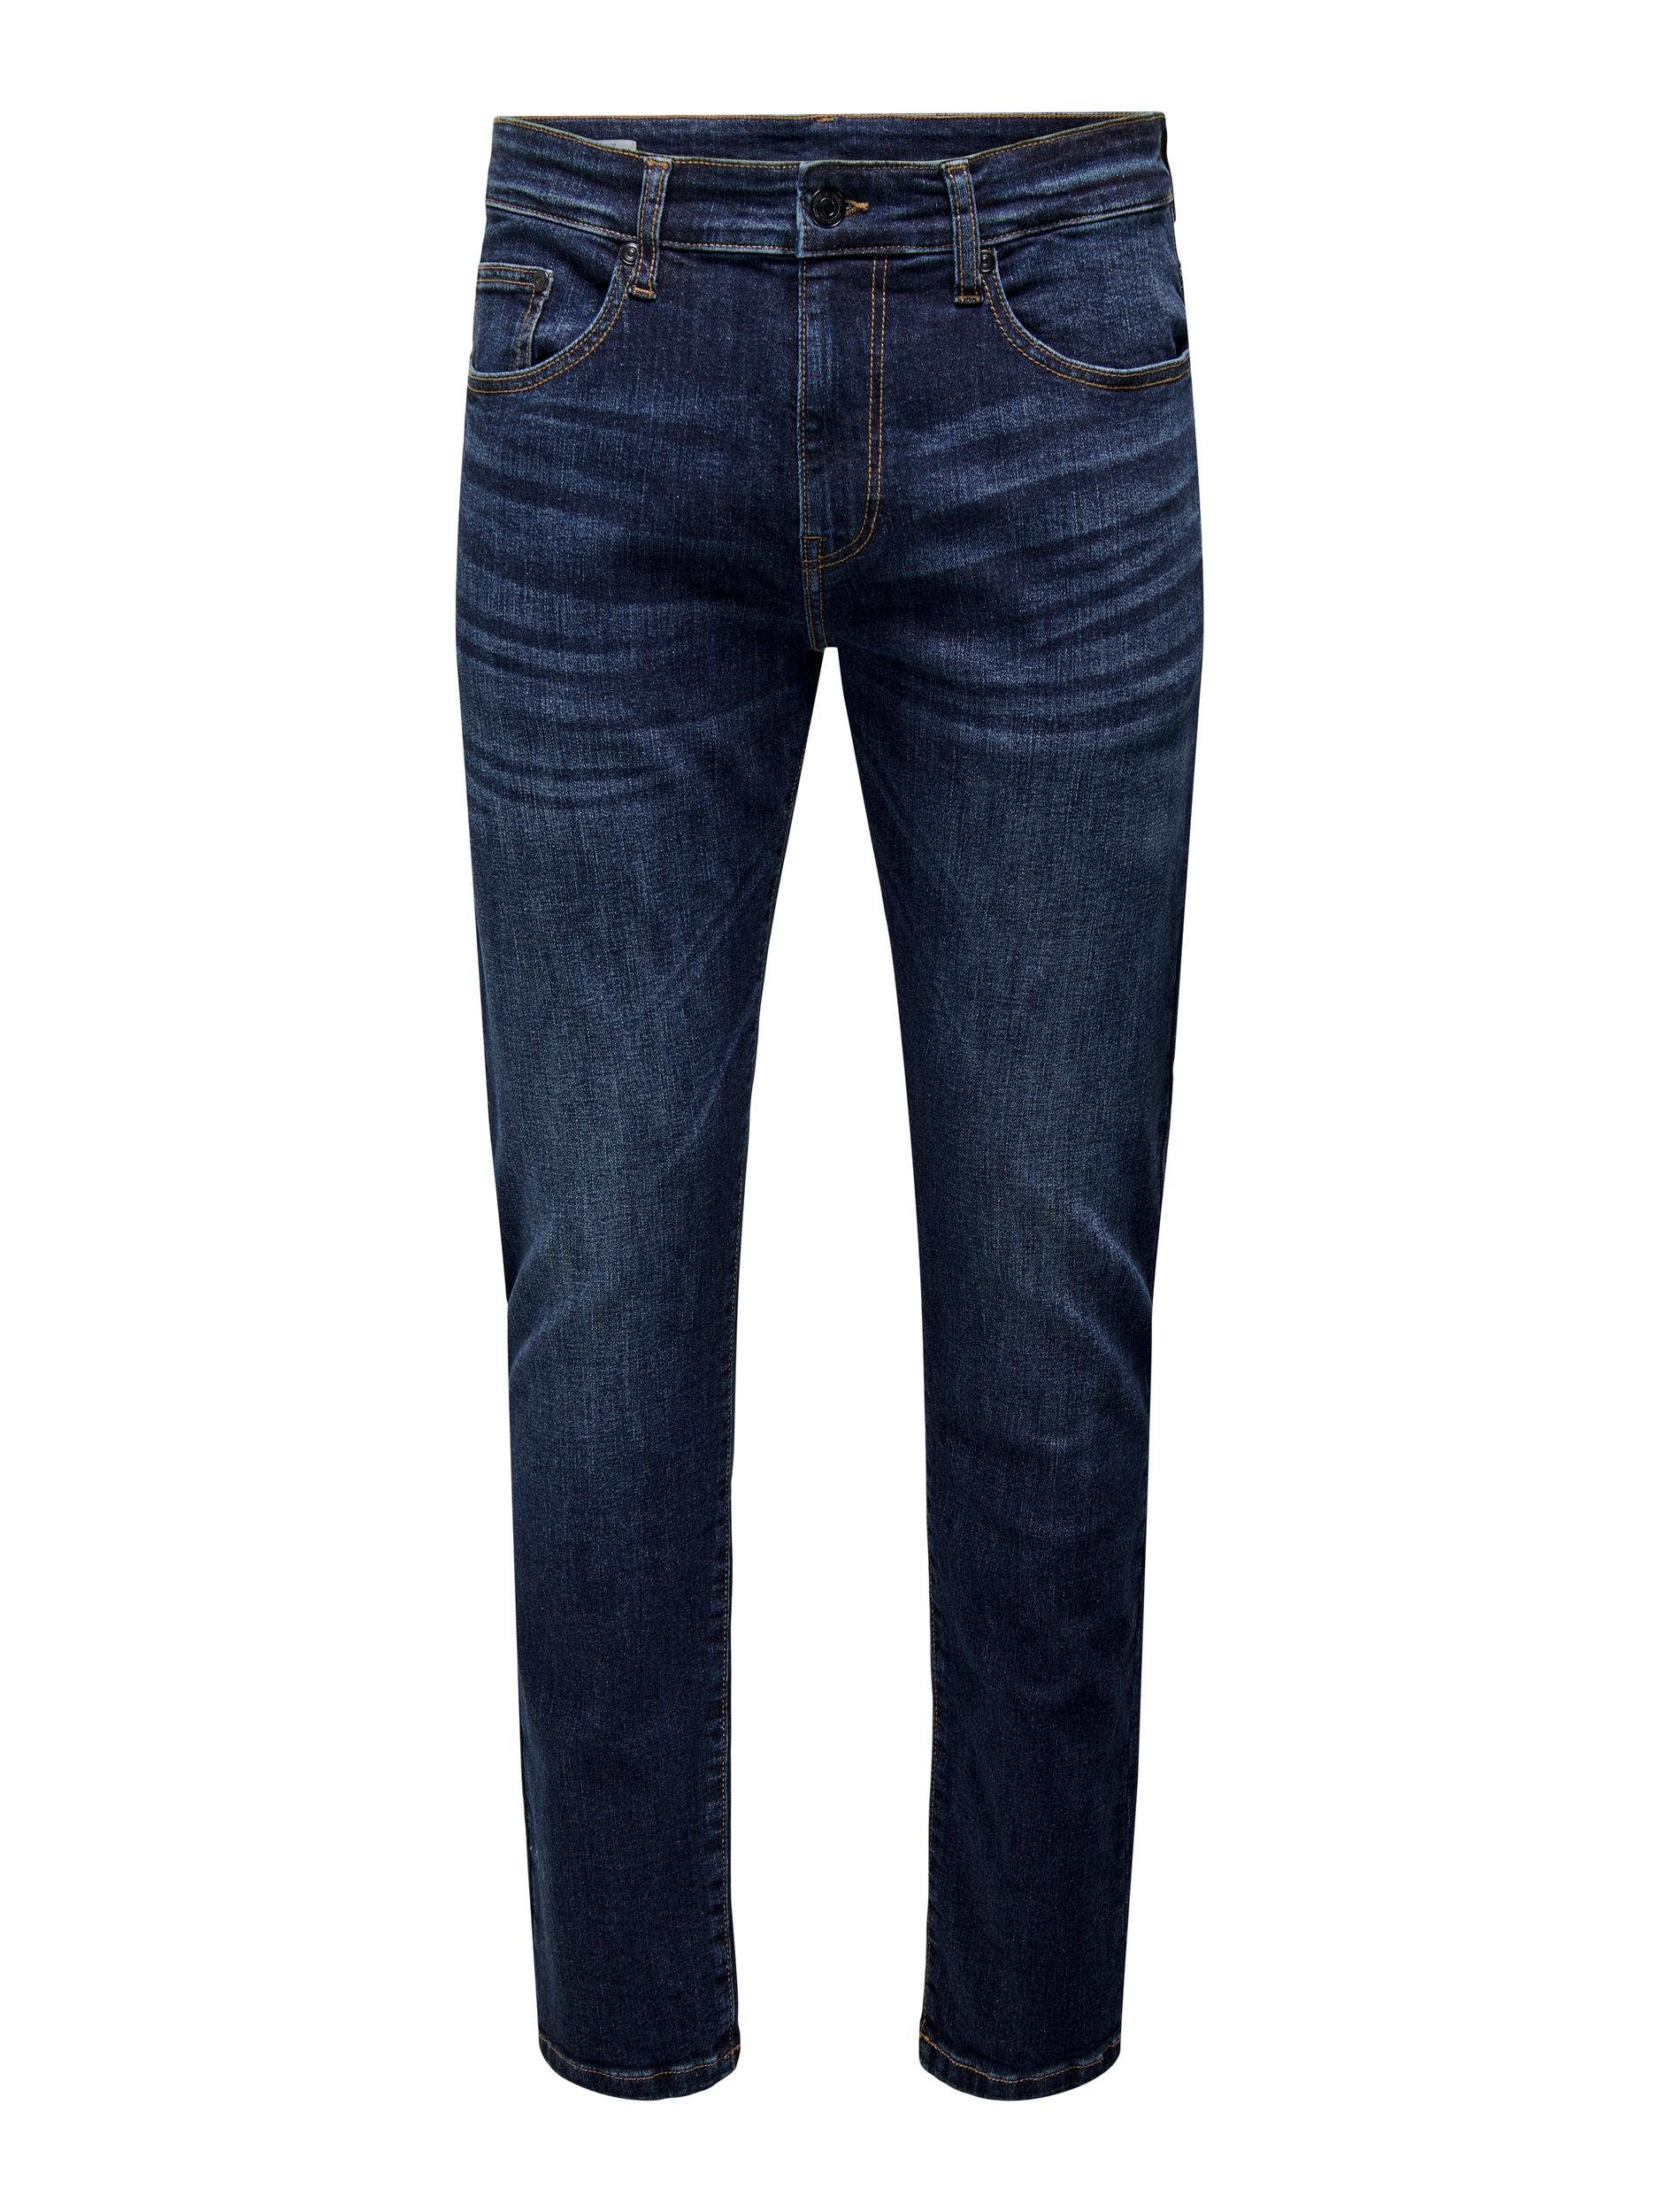 DNM 6752 ONLY & BLUE JEANS SONS Straight-Jeans NOOS ONSWEFT REG.DK.